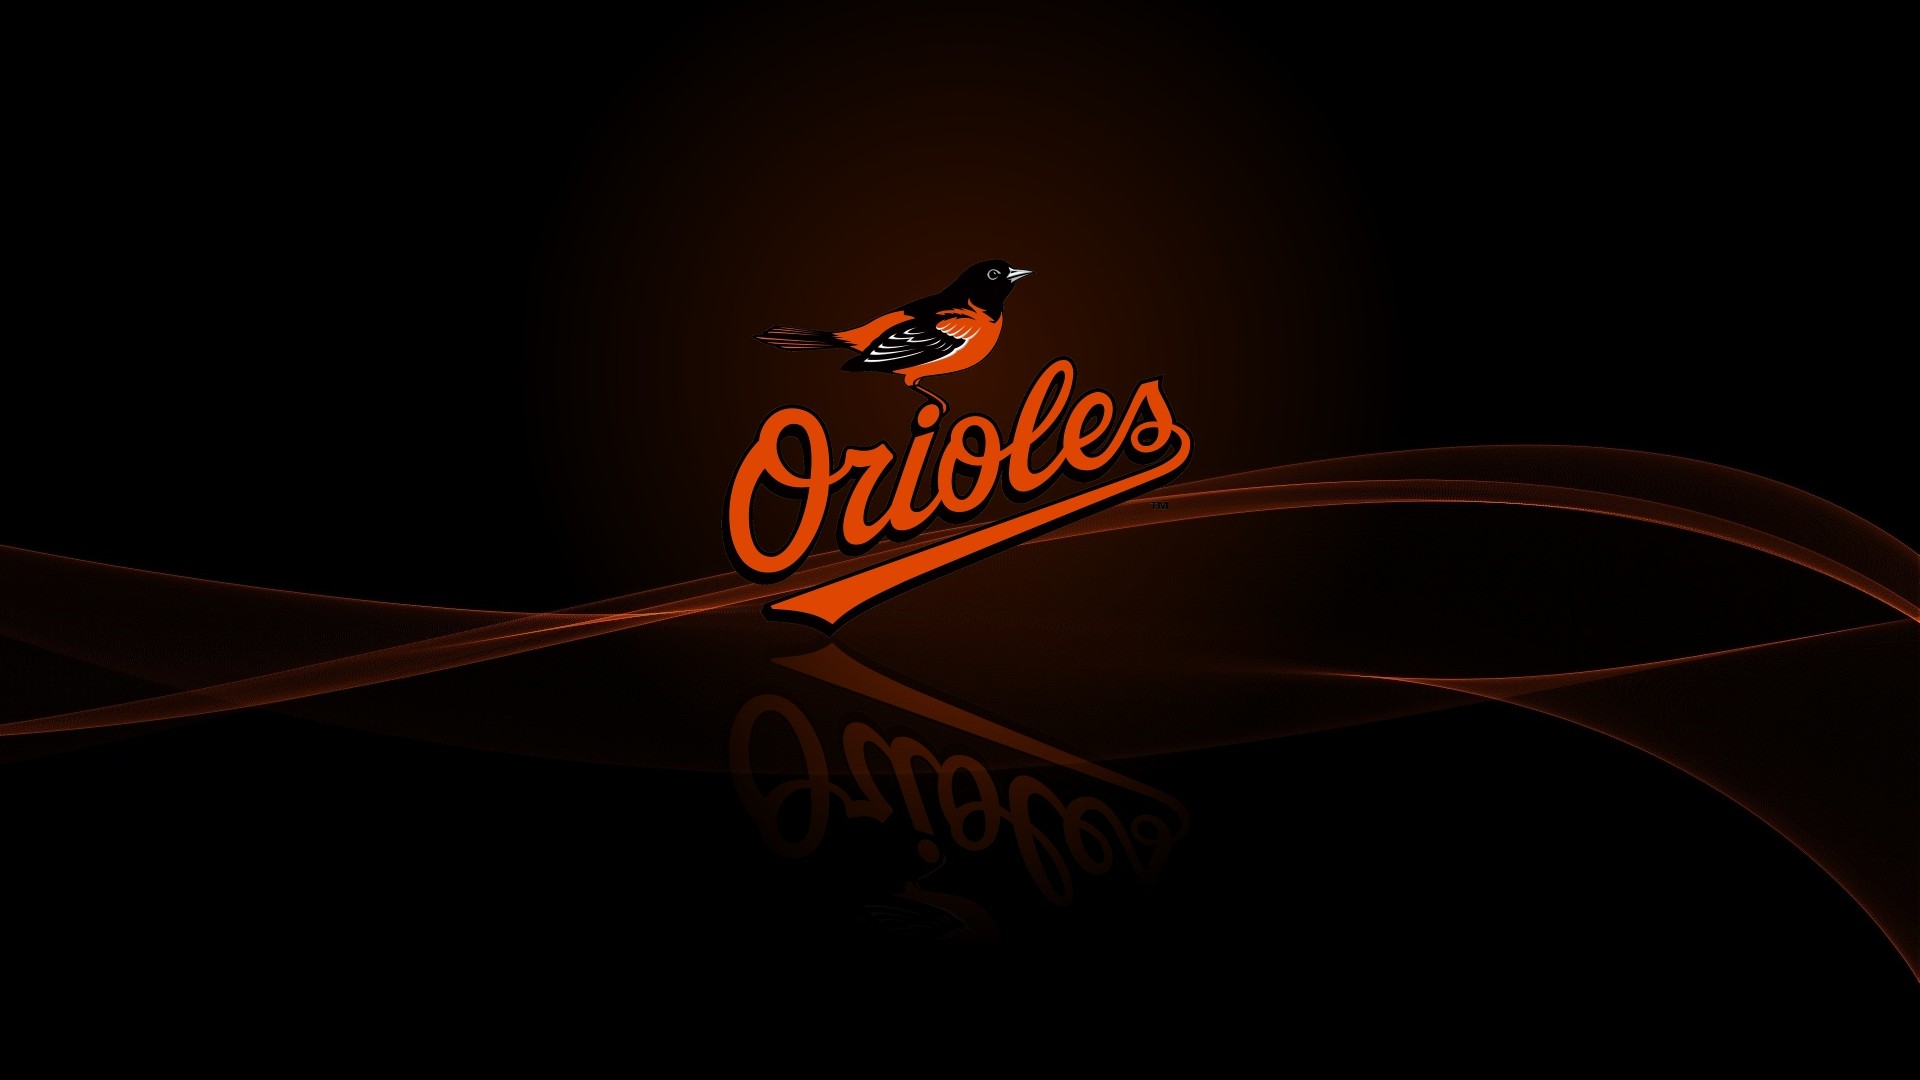 Wallpapers HD Baltimore Orioles with high-resolution 1920x1080 pixel. You can use this wallpaper for Mac Desktop Wallpaper, Laptop Screensavers, Android Wallpapers, Tablet or iPhone Home Screen and another mobile phone device